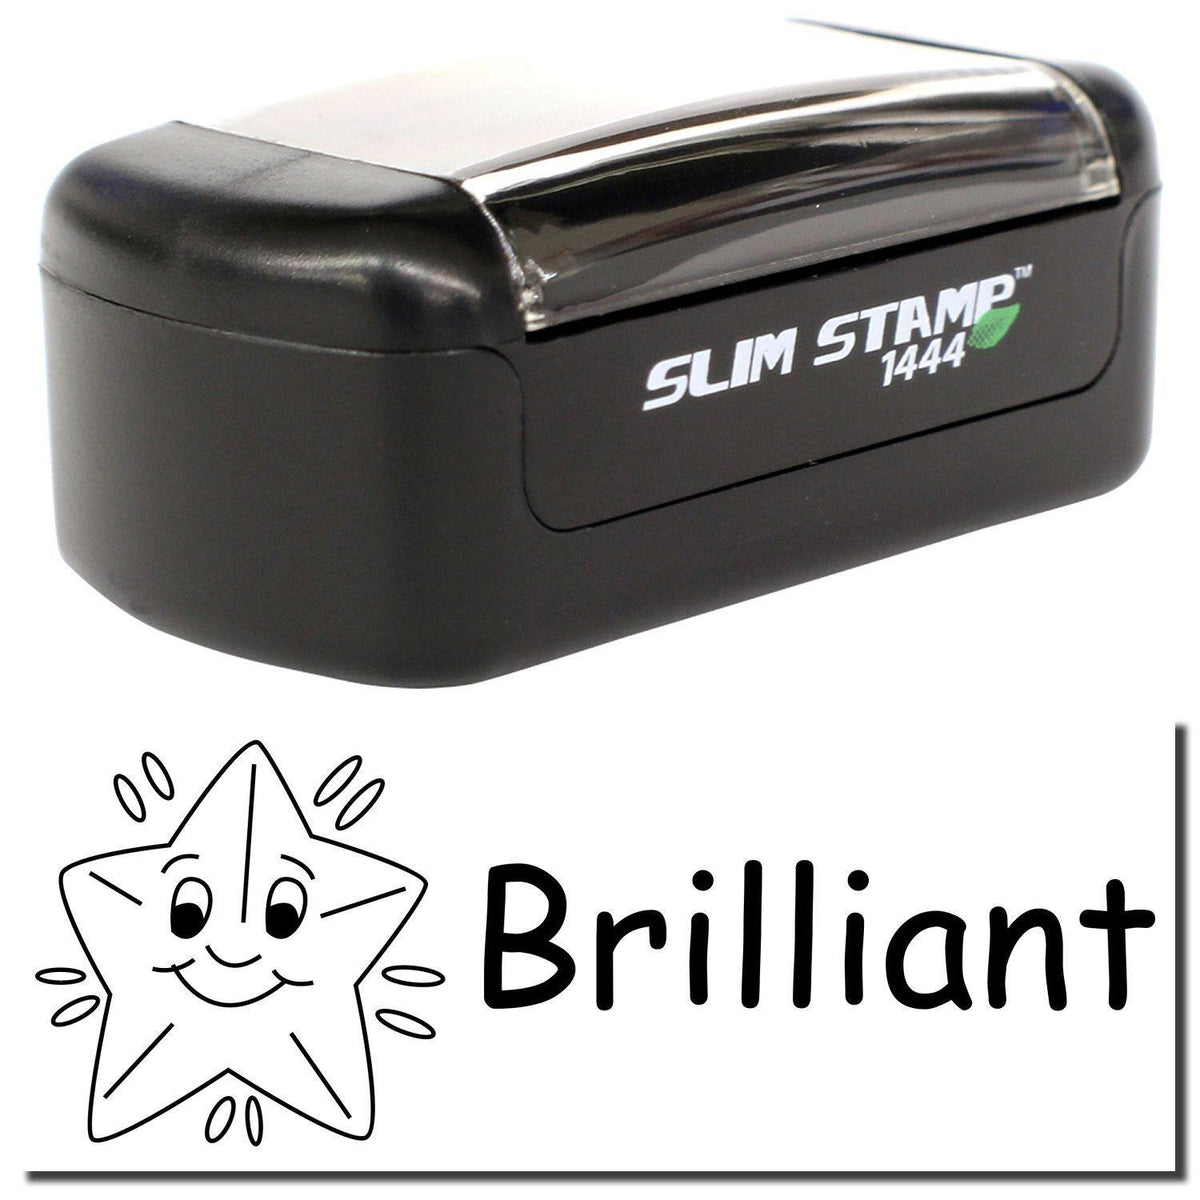 A stock office pre-inked stamp with a stamped image showing how the text &quot;Brilliant&quot; with a graphic of a smiling shining star on the left is displayed after stamping.